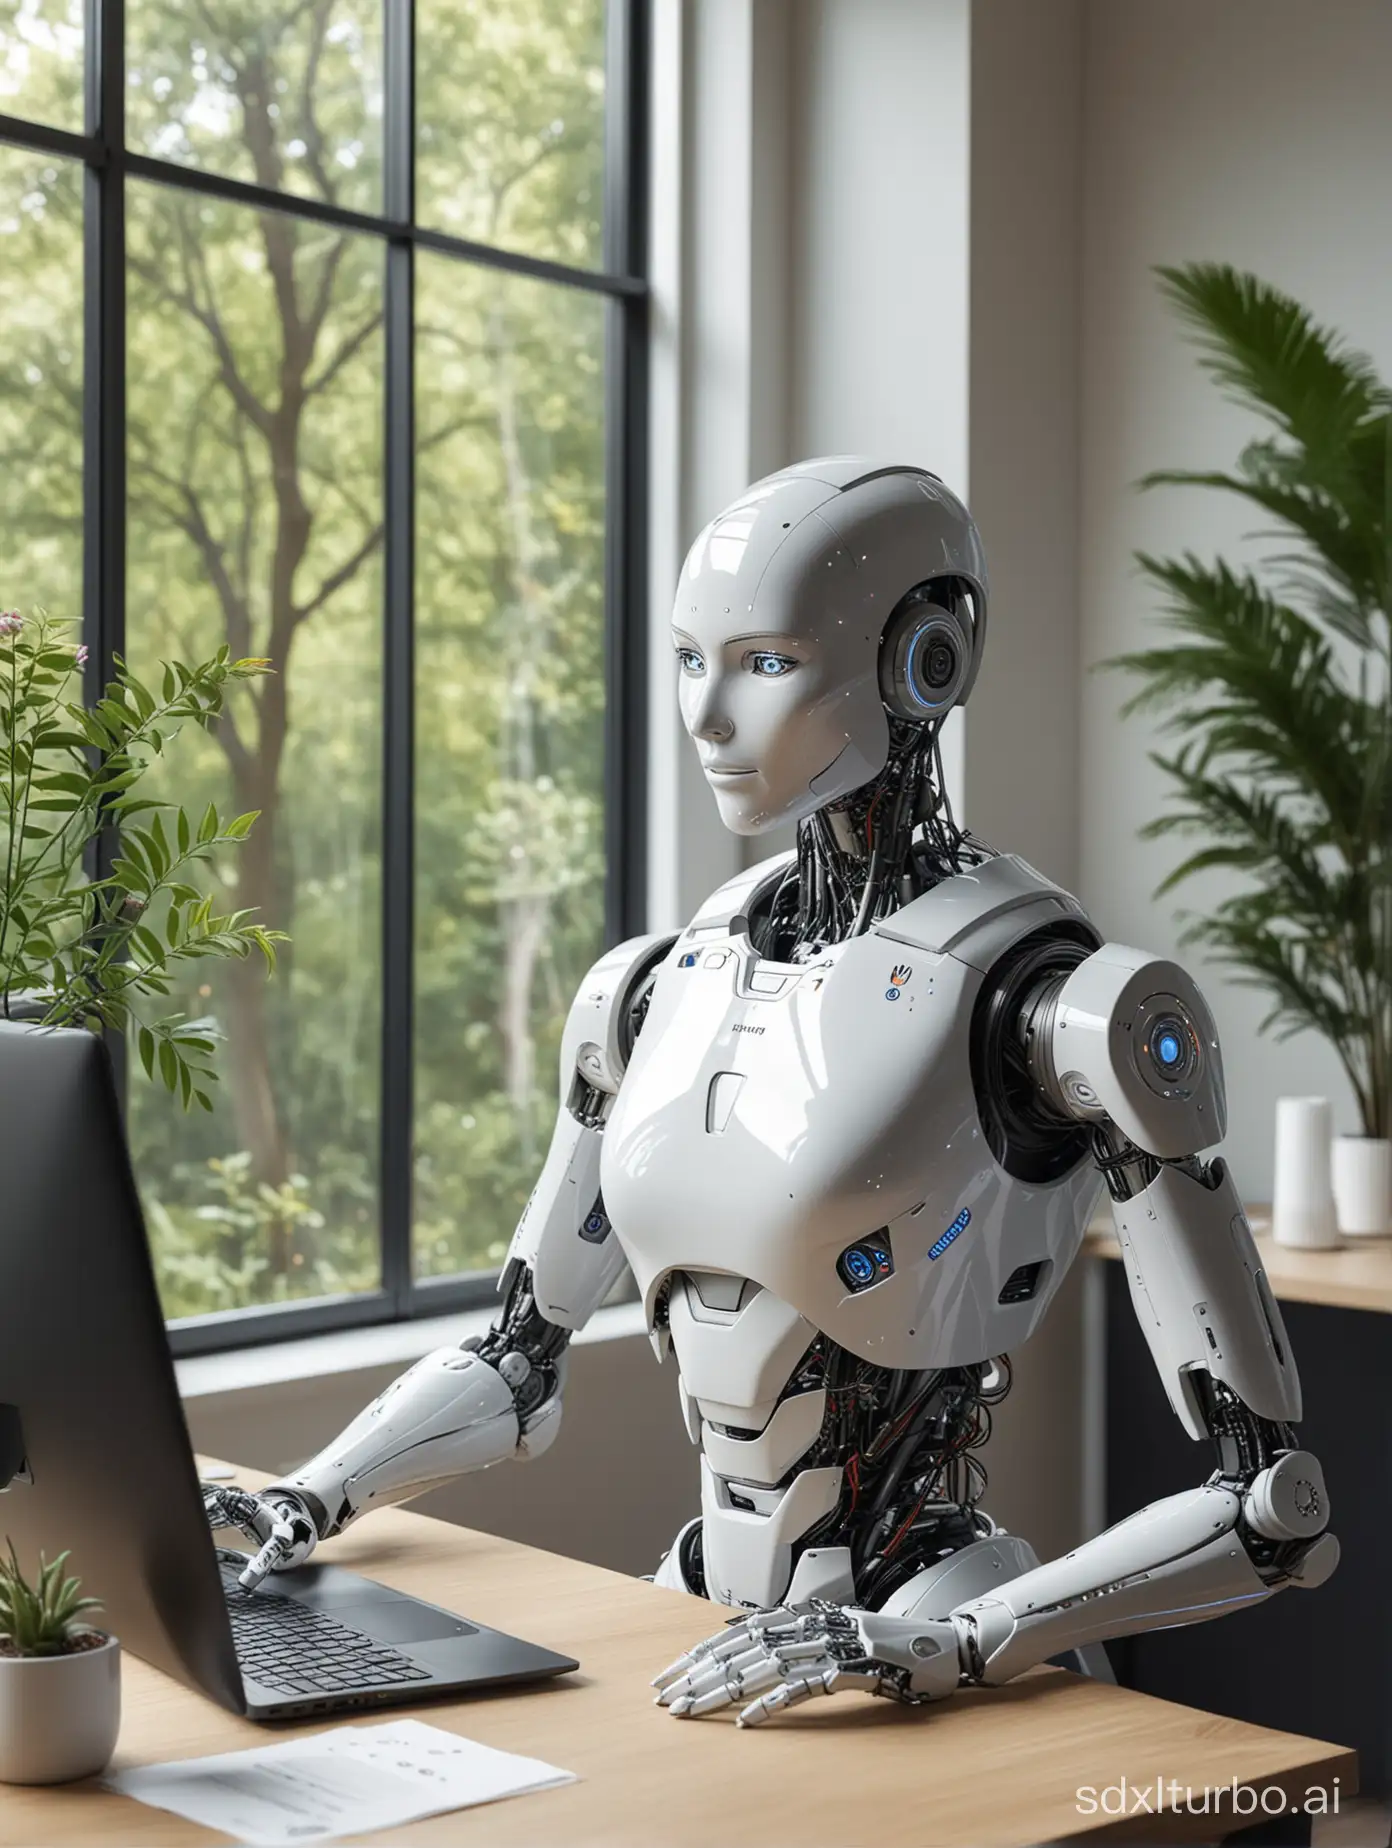 The female robot has a Huawei logo emblazoned on it, is staring intently at the monitor in front of it, side view, which shows a code editor, alongside a laptop and some files. In addition, there is a cup of coffee, a potted plant, and a bouquet of flowers on the desk, elements that add a touch of life to the scene and make the robot's image seem more humanized. In the background, a large window brings plenty of light into the room, and the trees outside the window are faintly visible, adding a touch of nature to the whole scene. The layout of the whole office is simple and modern, full of futuristic feeling, but also reveals a cozy and peaceful atmosphere